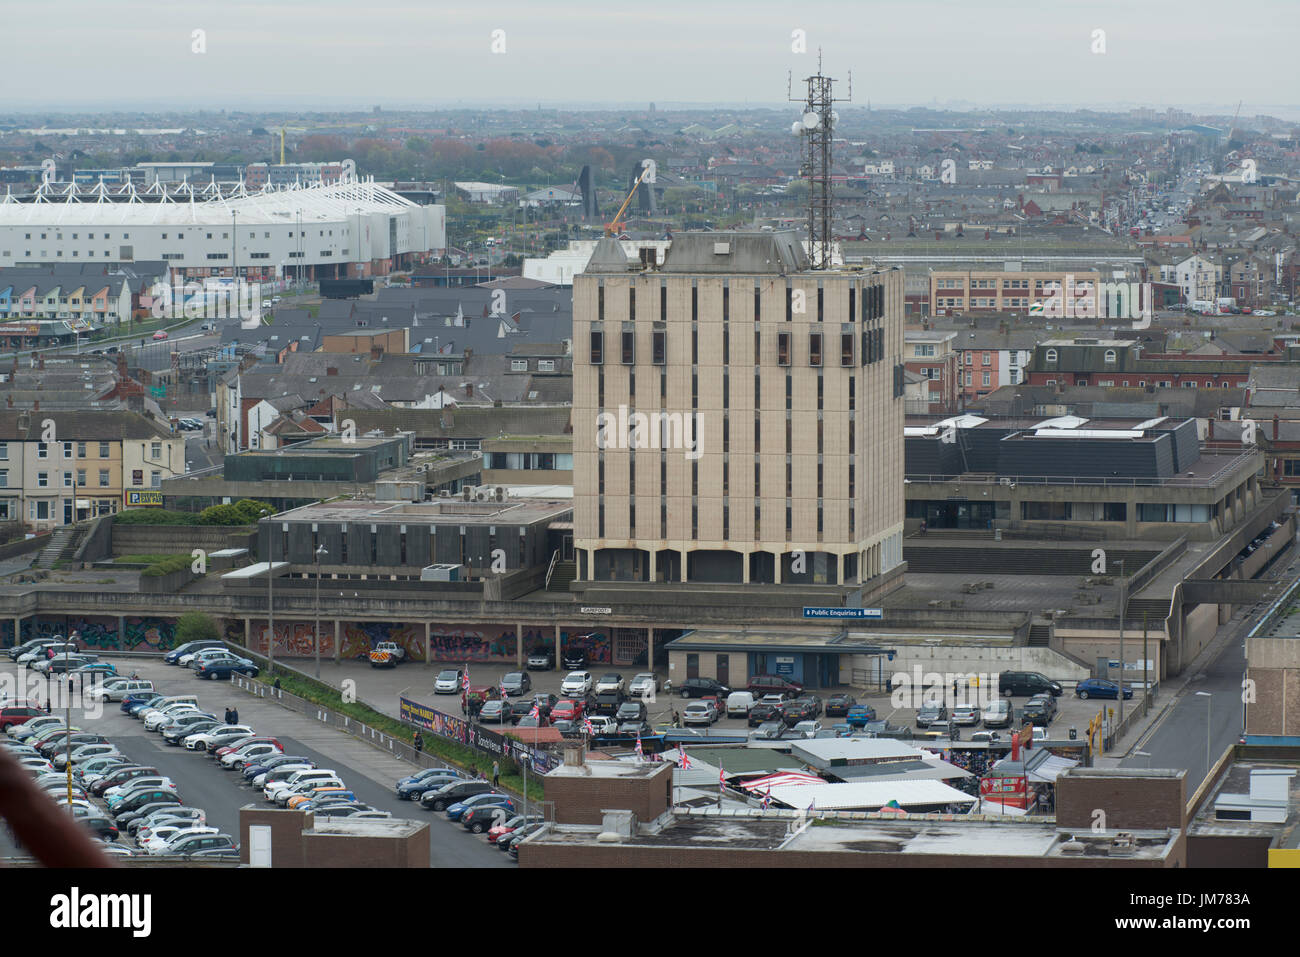 Bonny St, Blackpool.The old Police station. ready for refurbishment and demolish. credit: LEE RAMSDEN / ALAMY Stock Photo